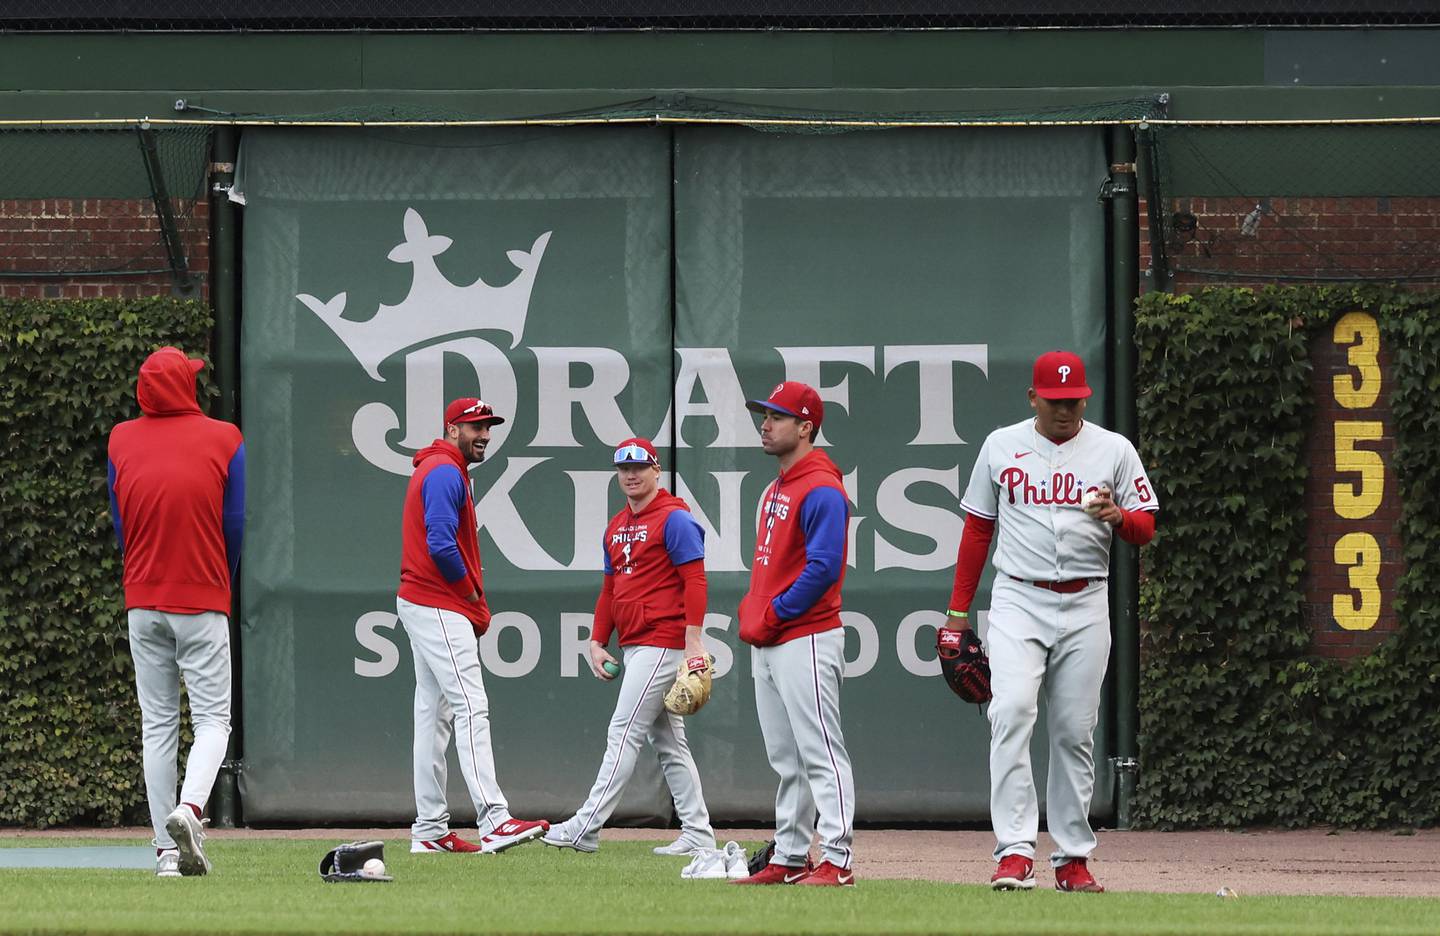 A DraftKings Sportsbook logo is displayed on the right field wall of Wrigley Field as Philadelphia Phillies players warm up for a game against the Chicago Cubs on Sept. 27, 2022.